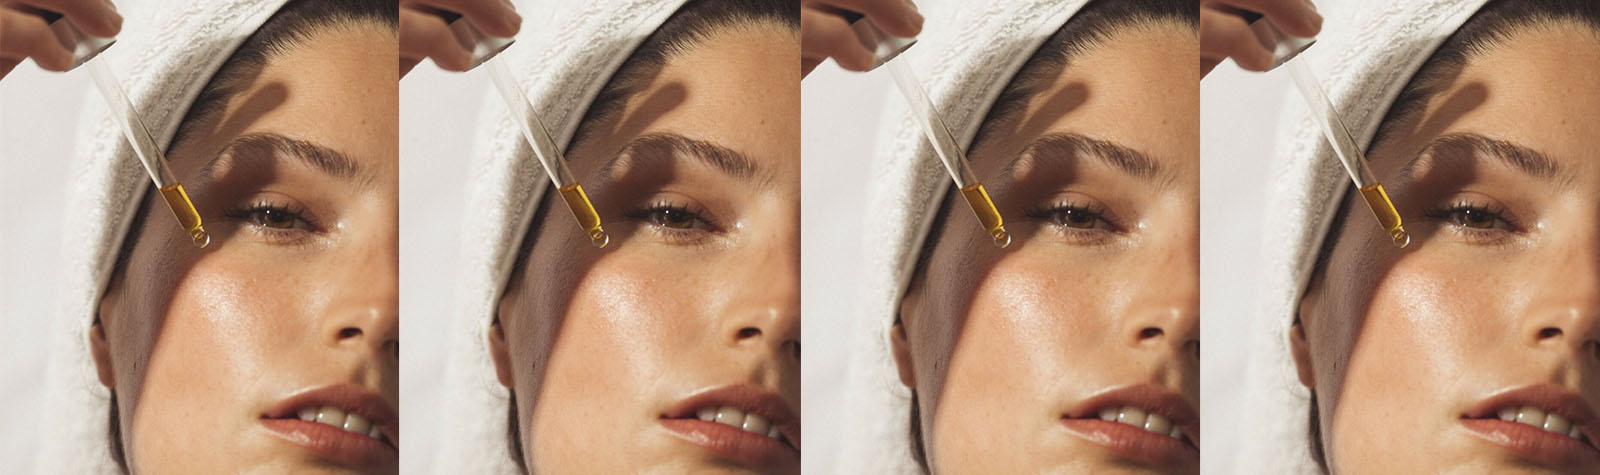 Town and Country · How To Master the Steps of the At-Home Facial